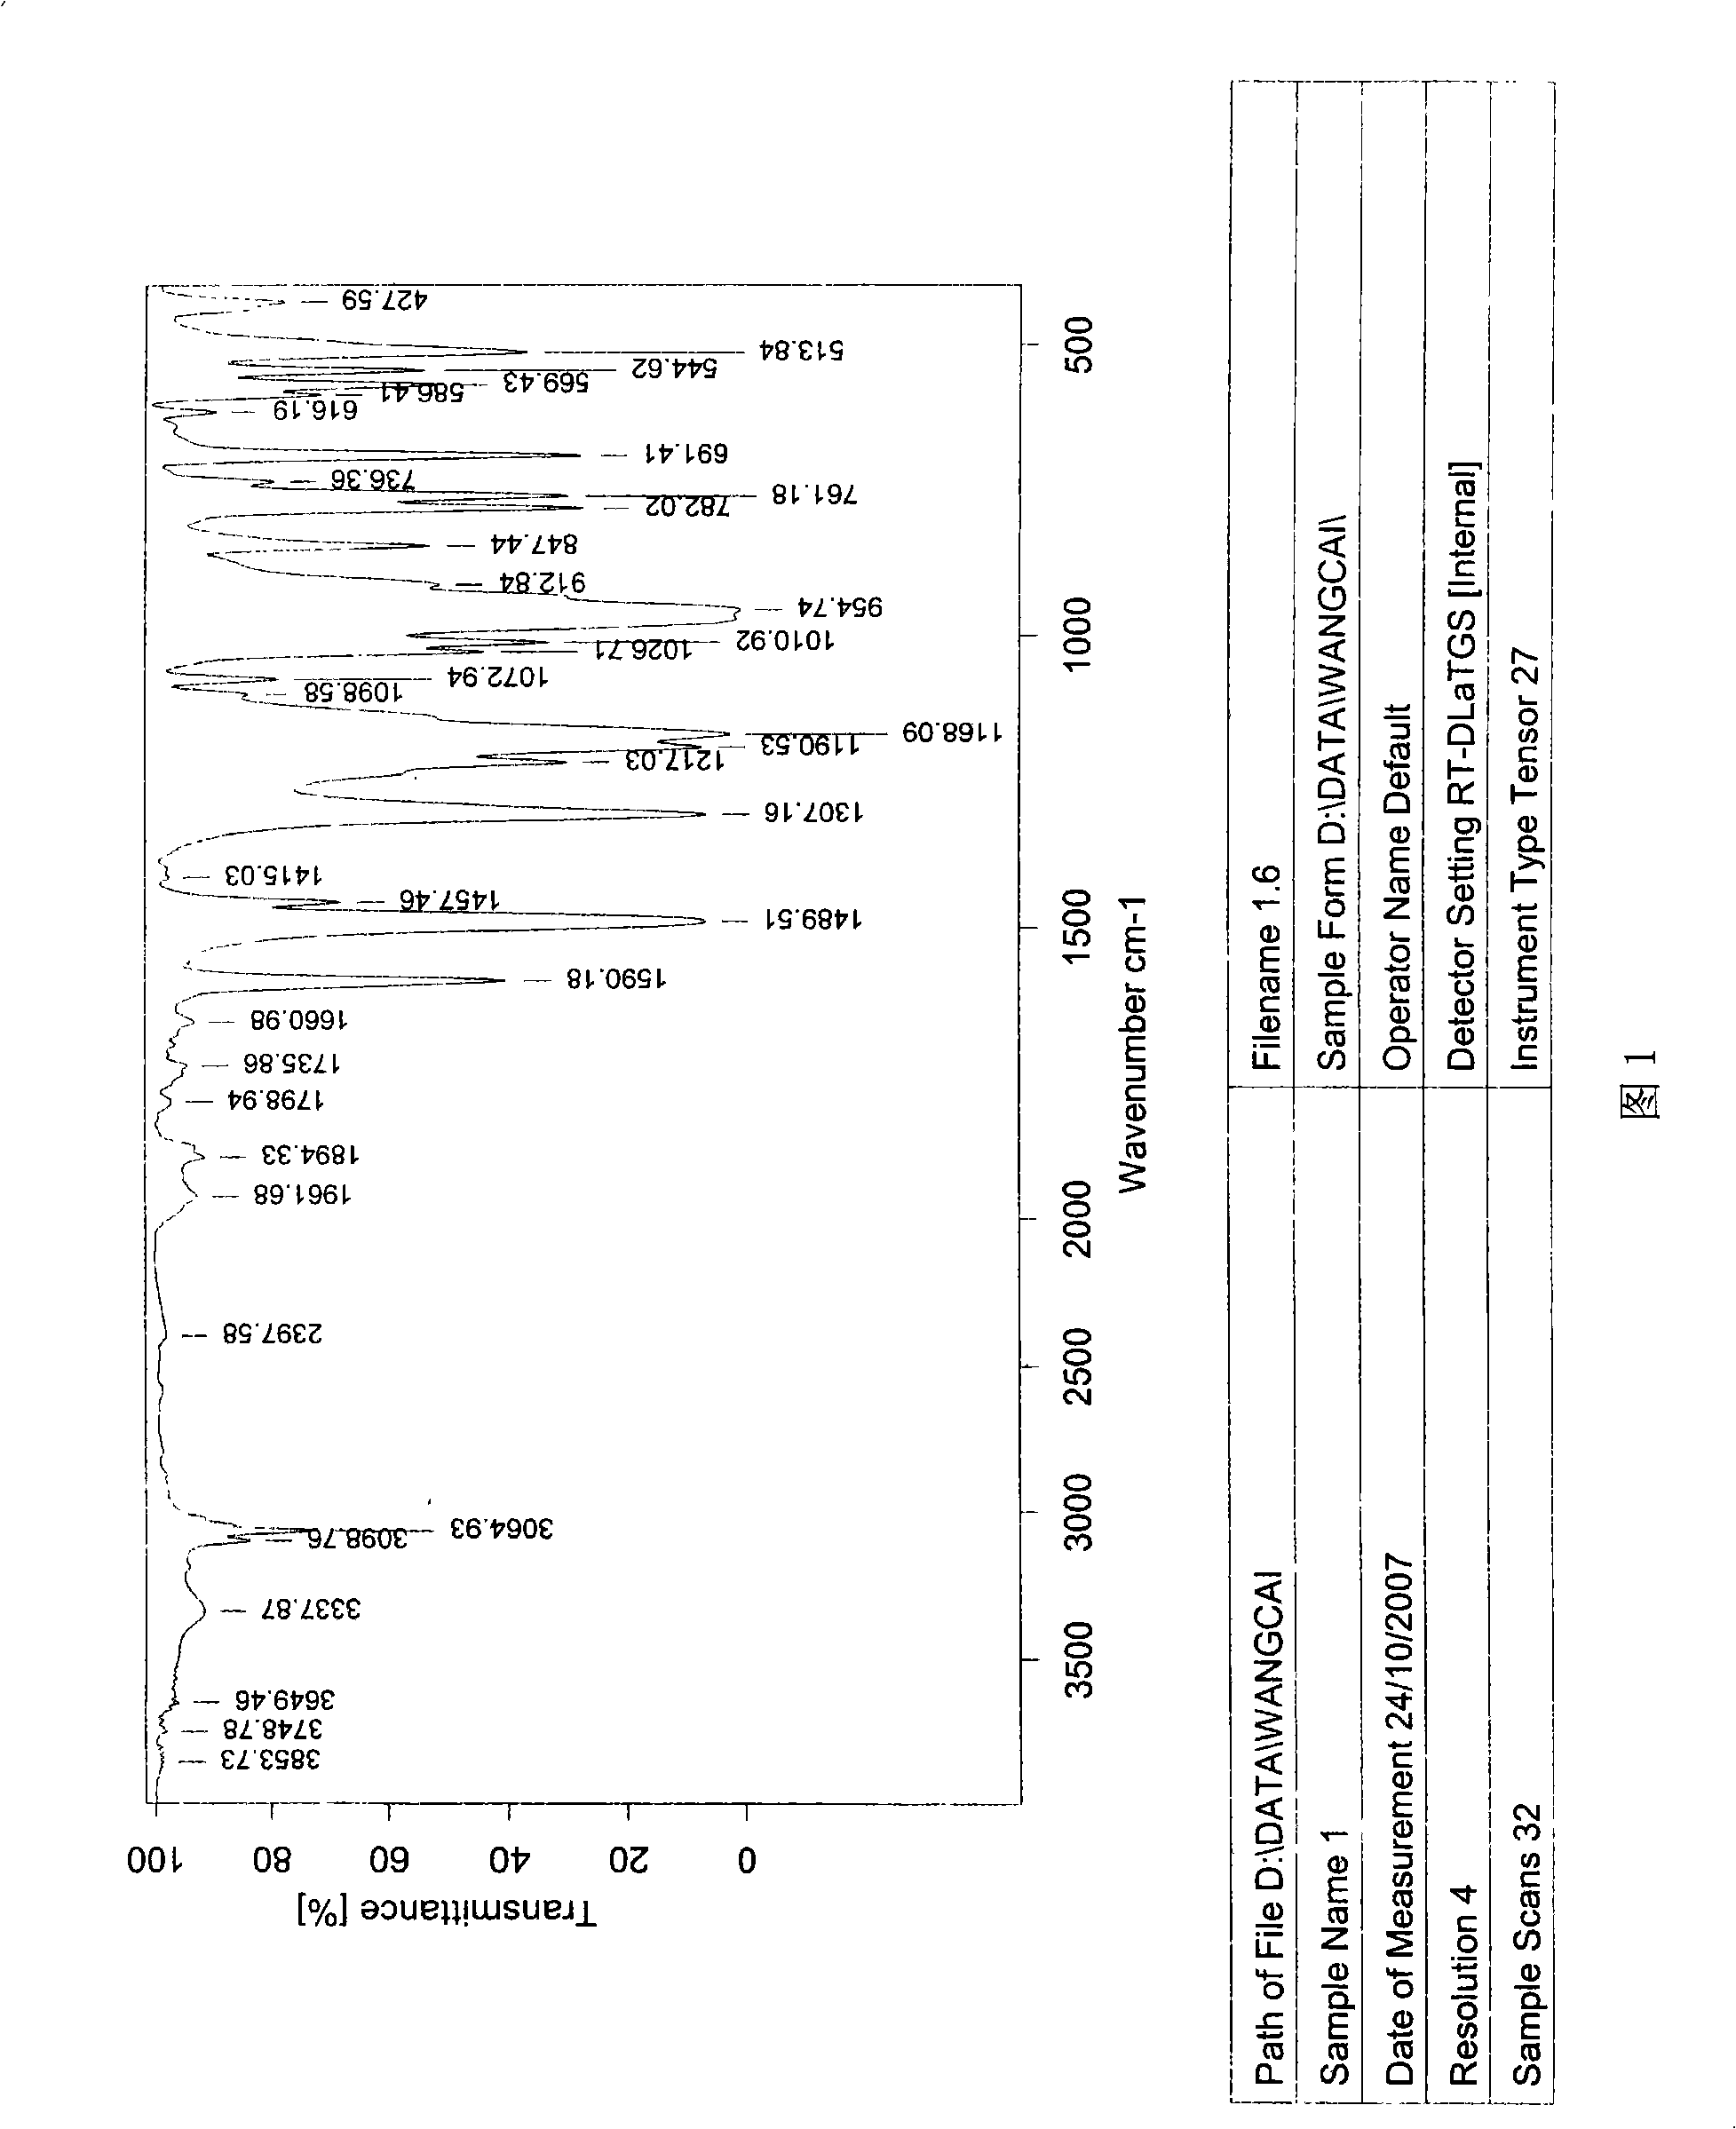 Non-halogen phosphoric acid ester combustion inhibitor for engineering plastic and method of preparing the same